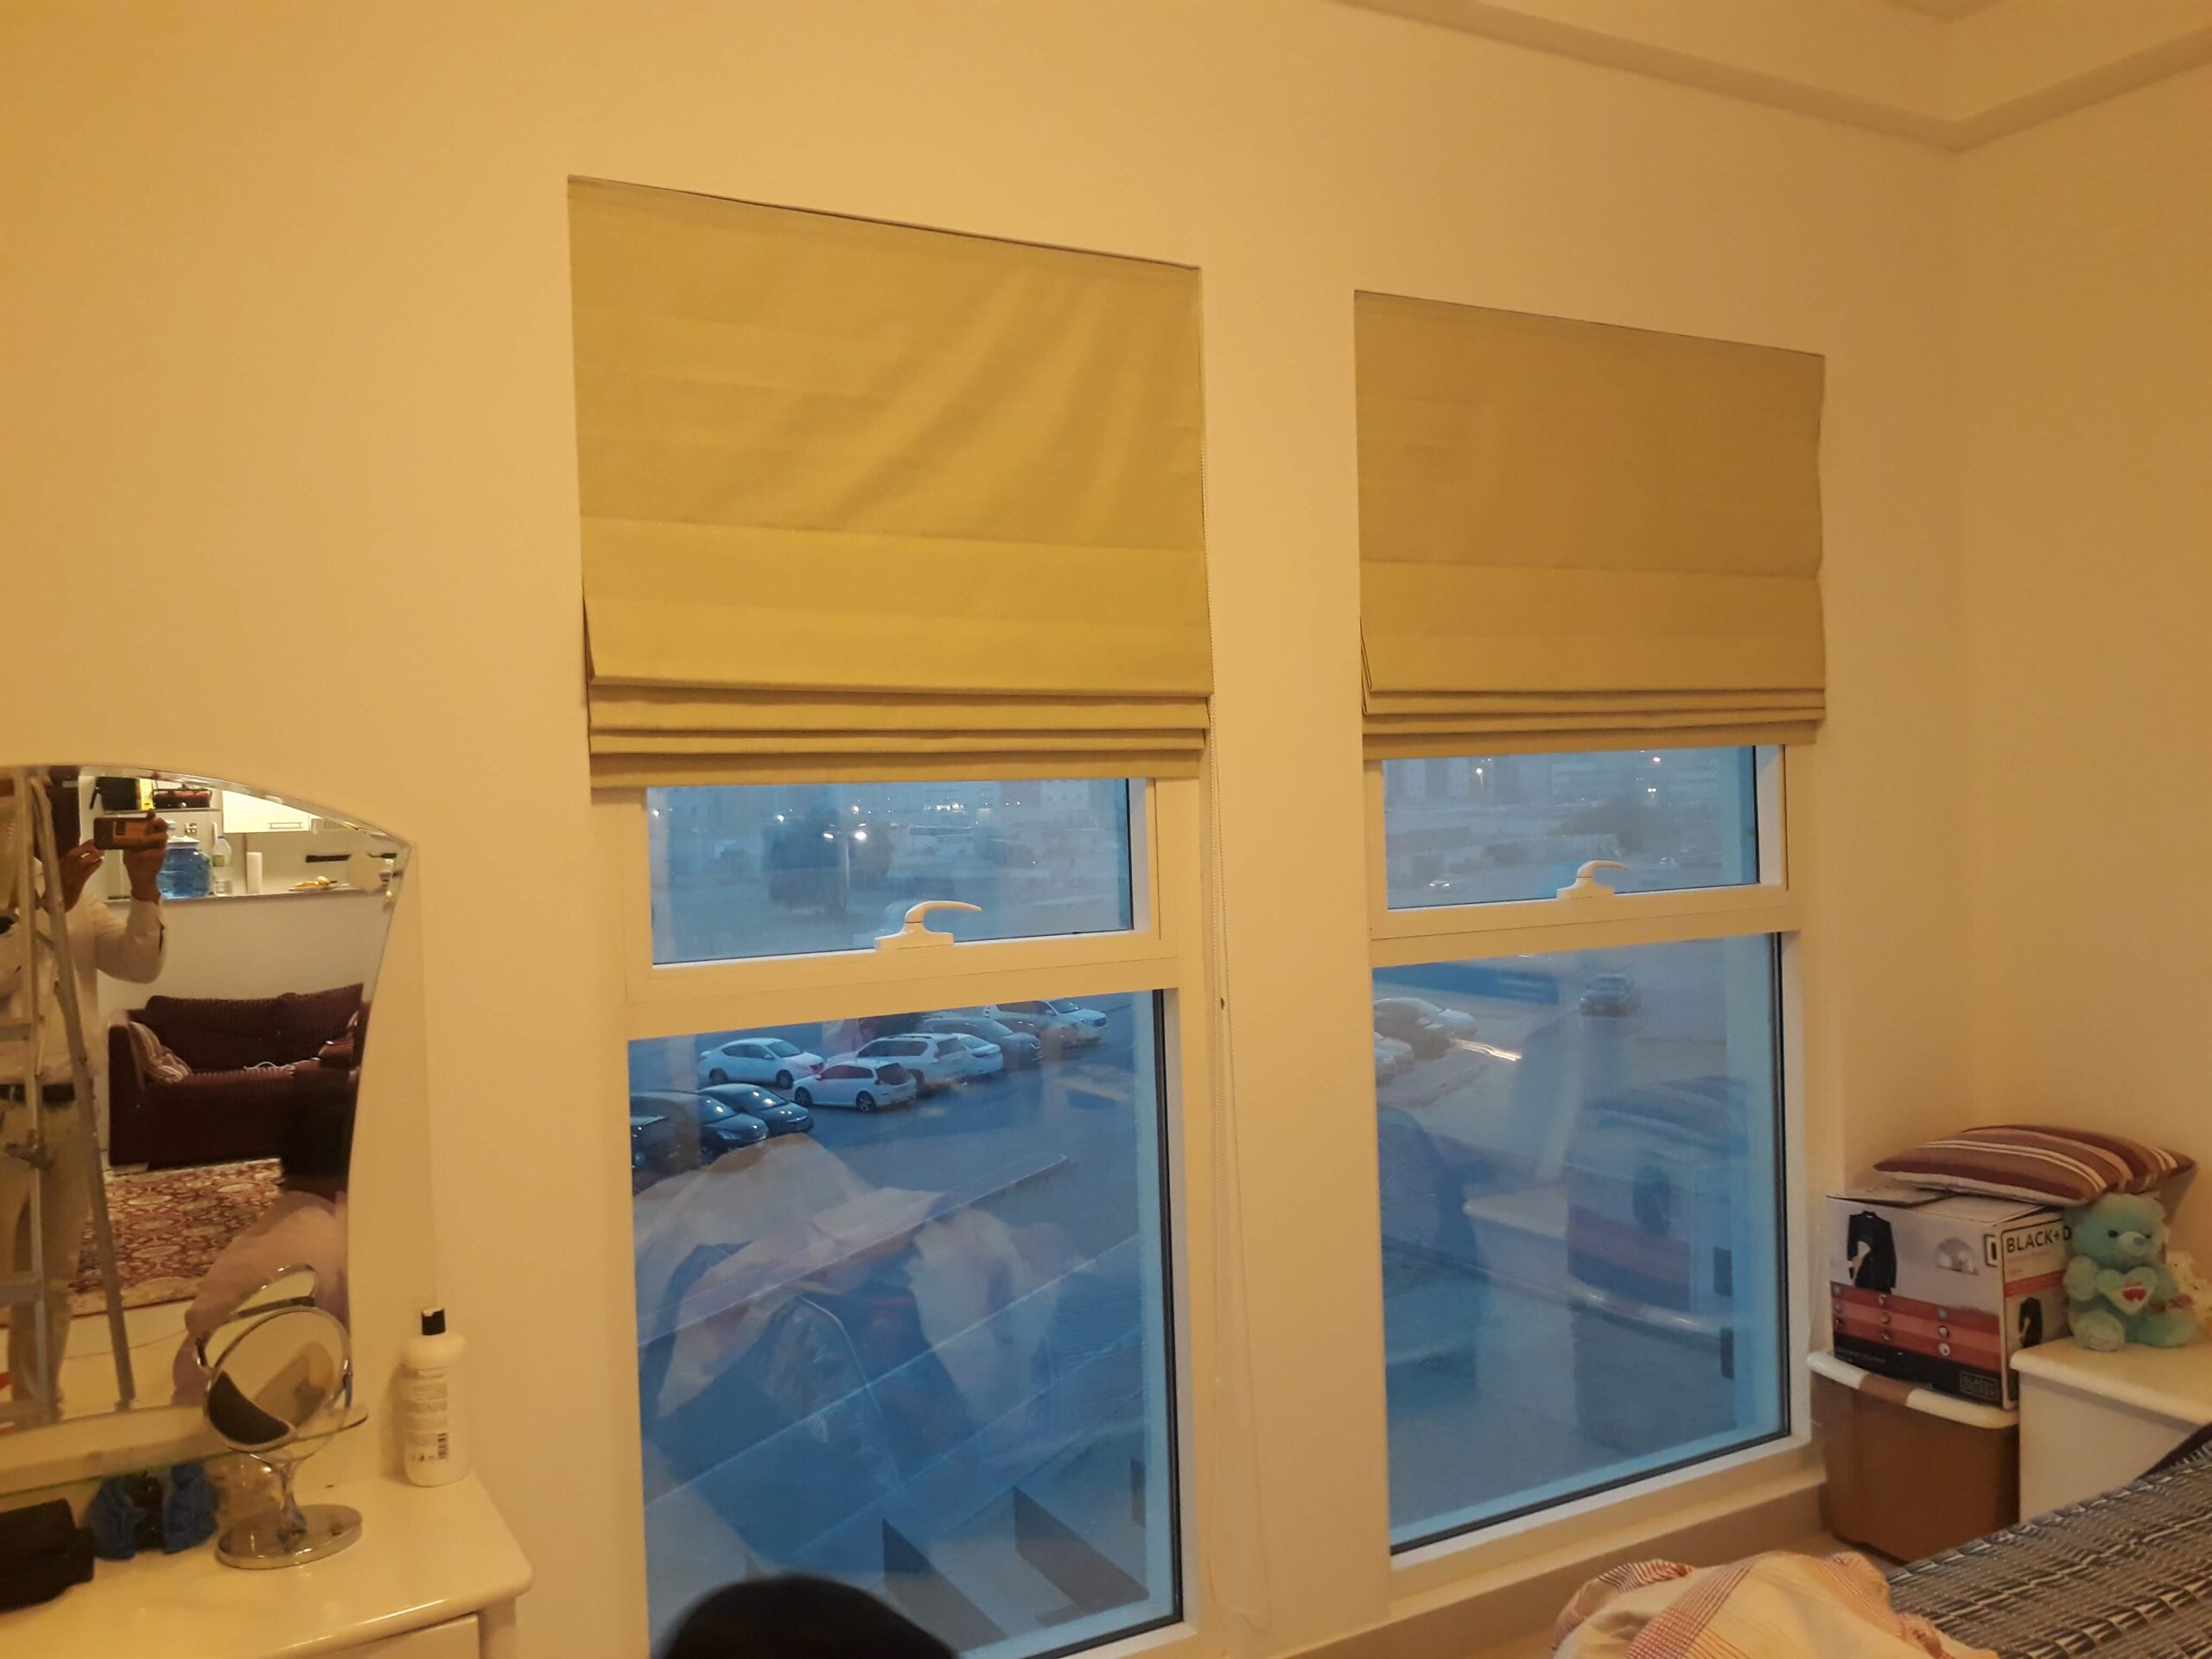 Enhance Your Space with Stylish Blackout Blinds in Dubai